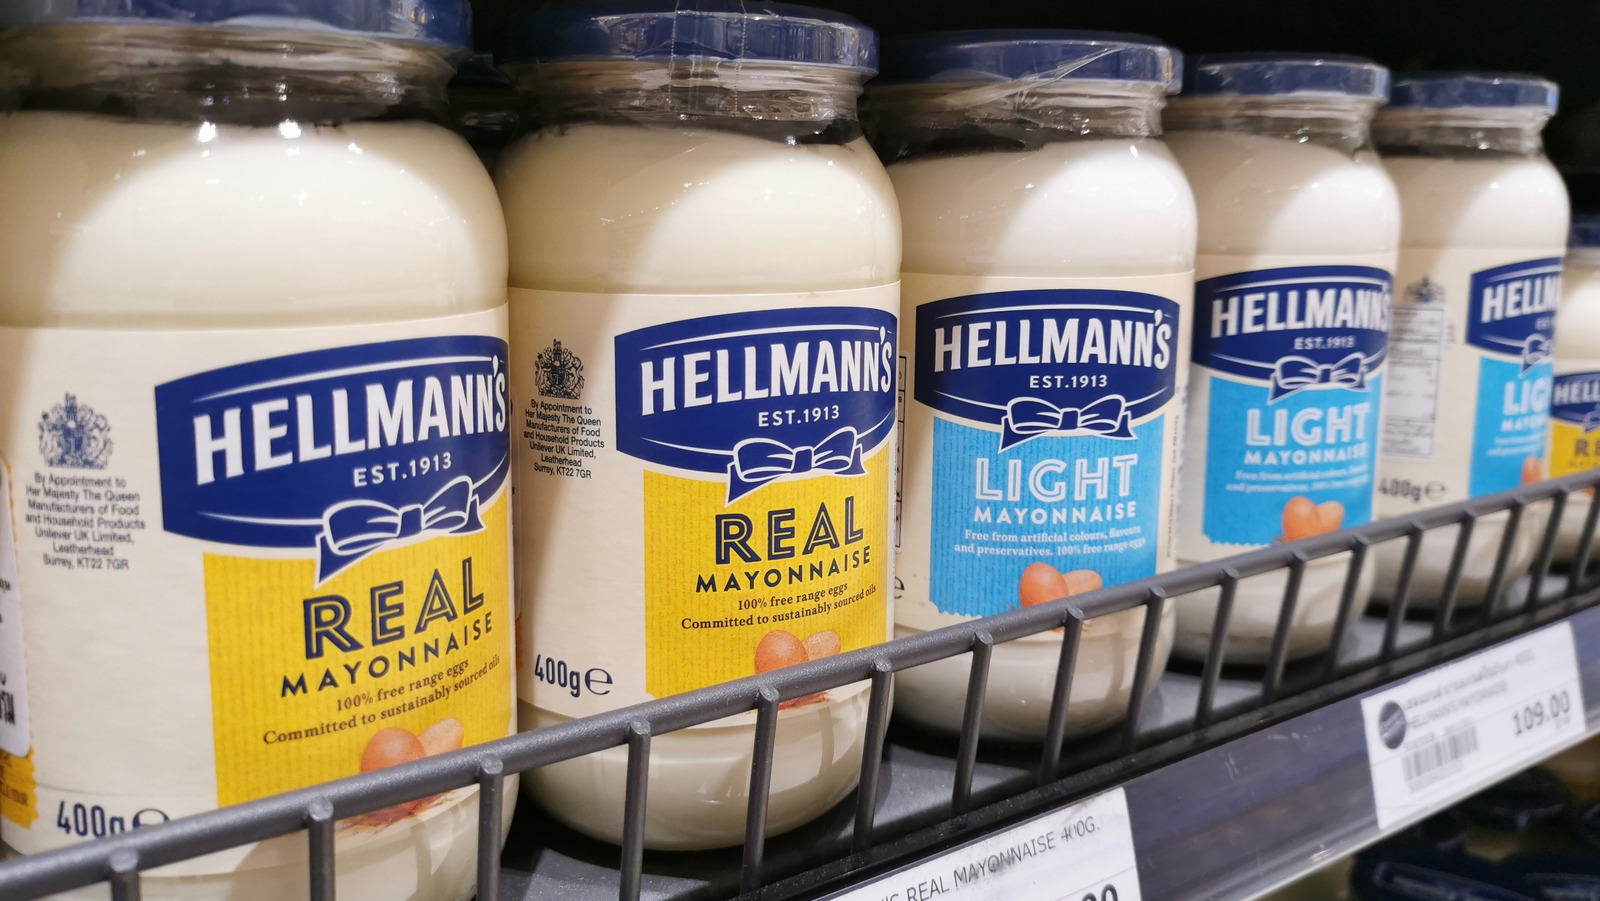 Unilever launches Hellmann's sauces range in UK - Just Food